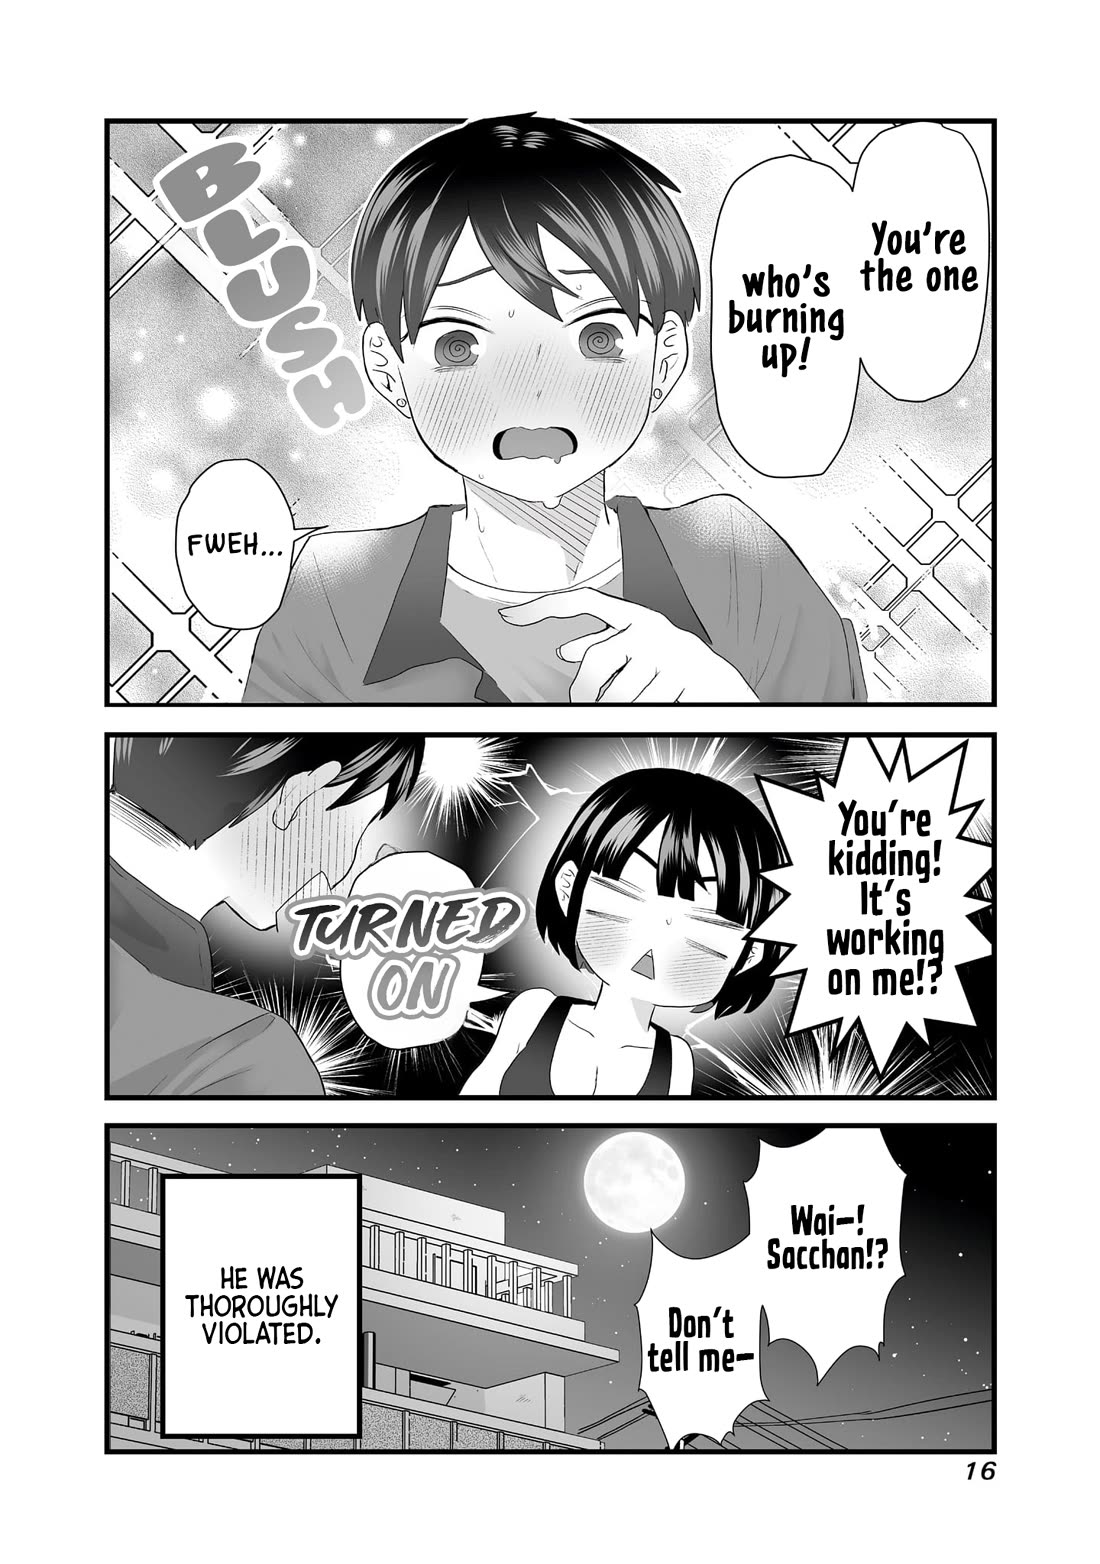 Sacchan and Ken-chan Are Going at it Again - chapter 2 - #4